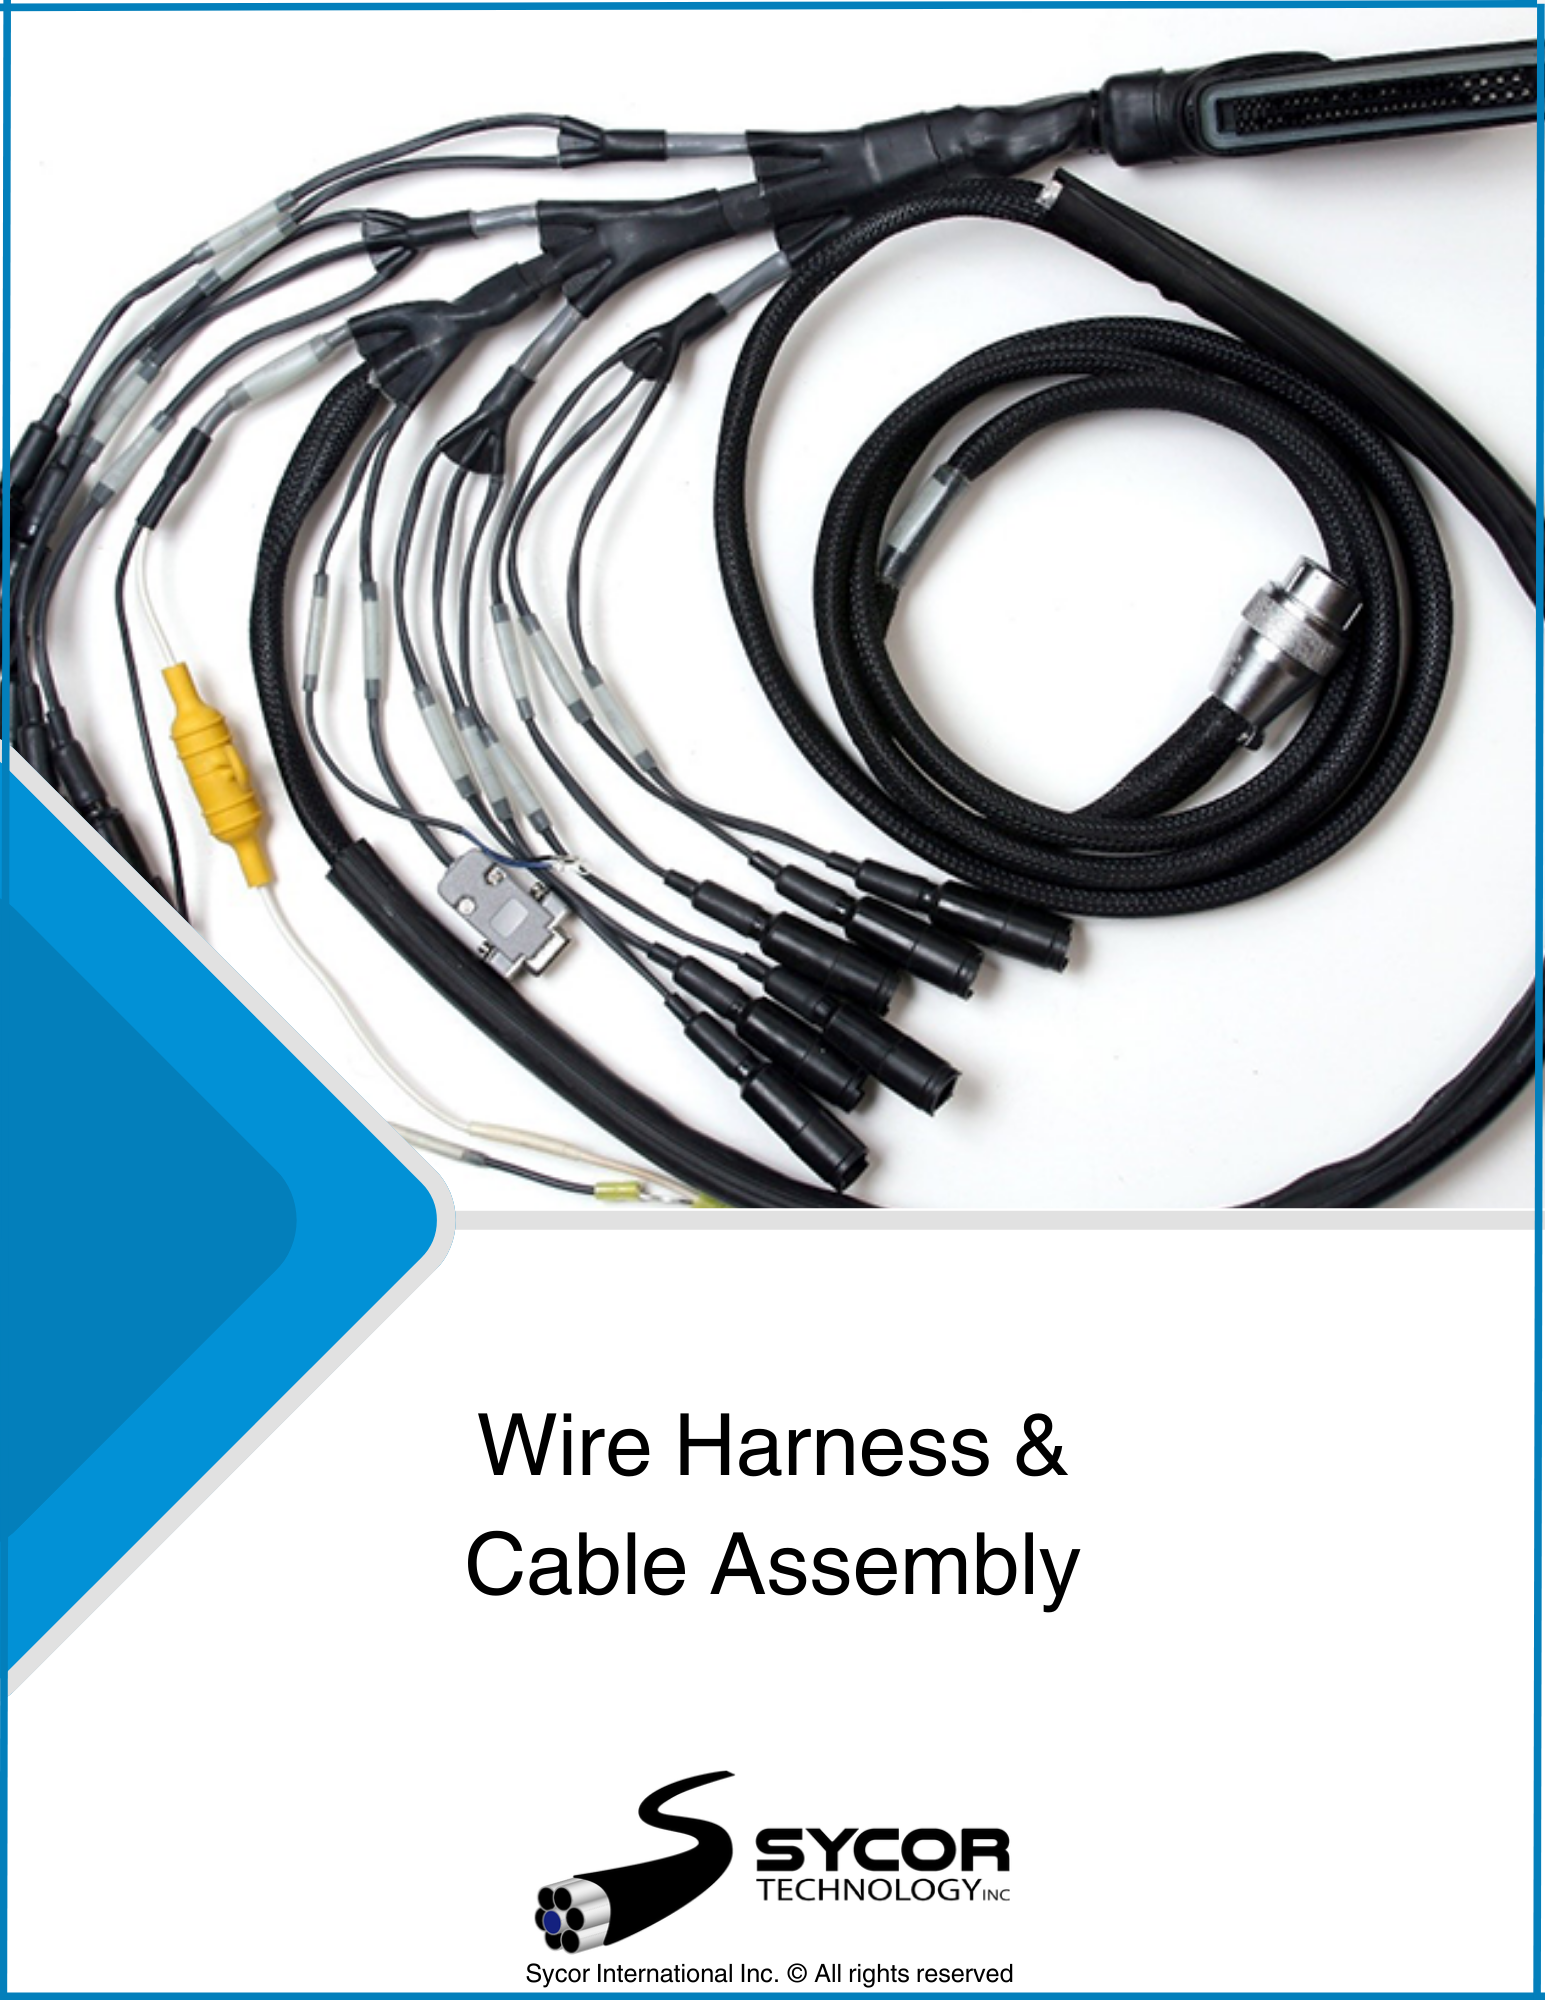 Wire Harnessing & Cable Assembly Brochure